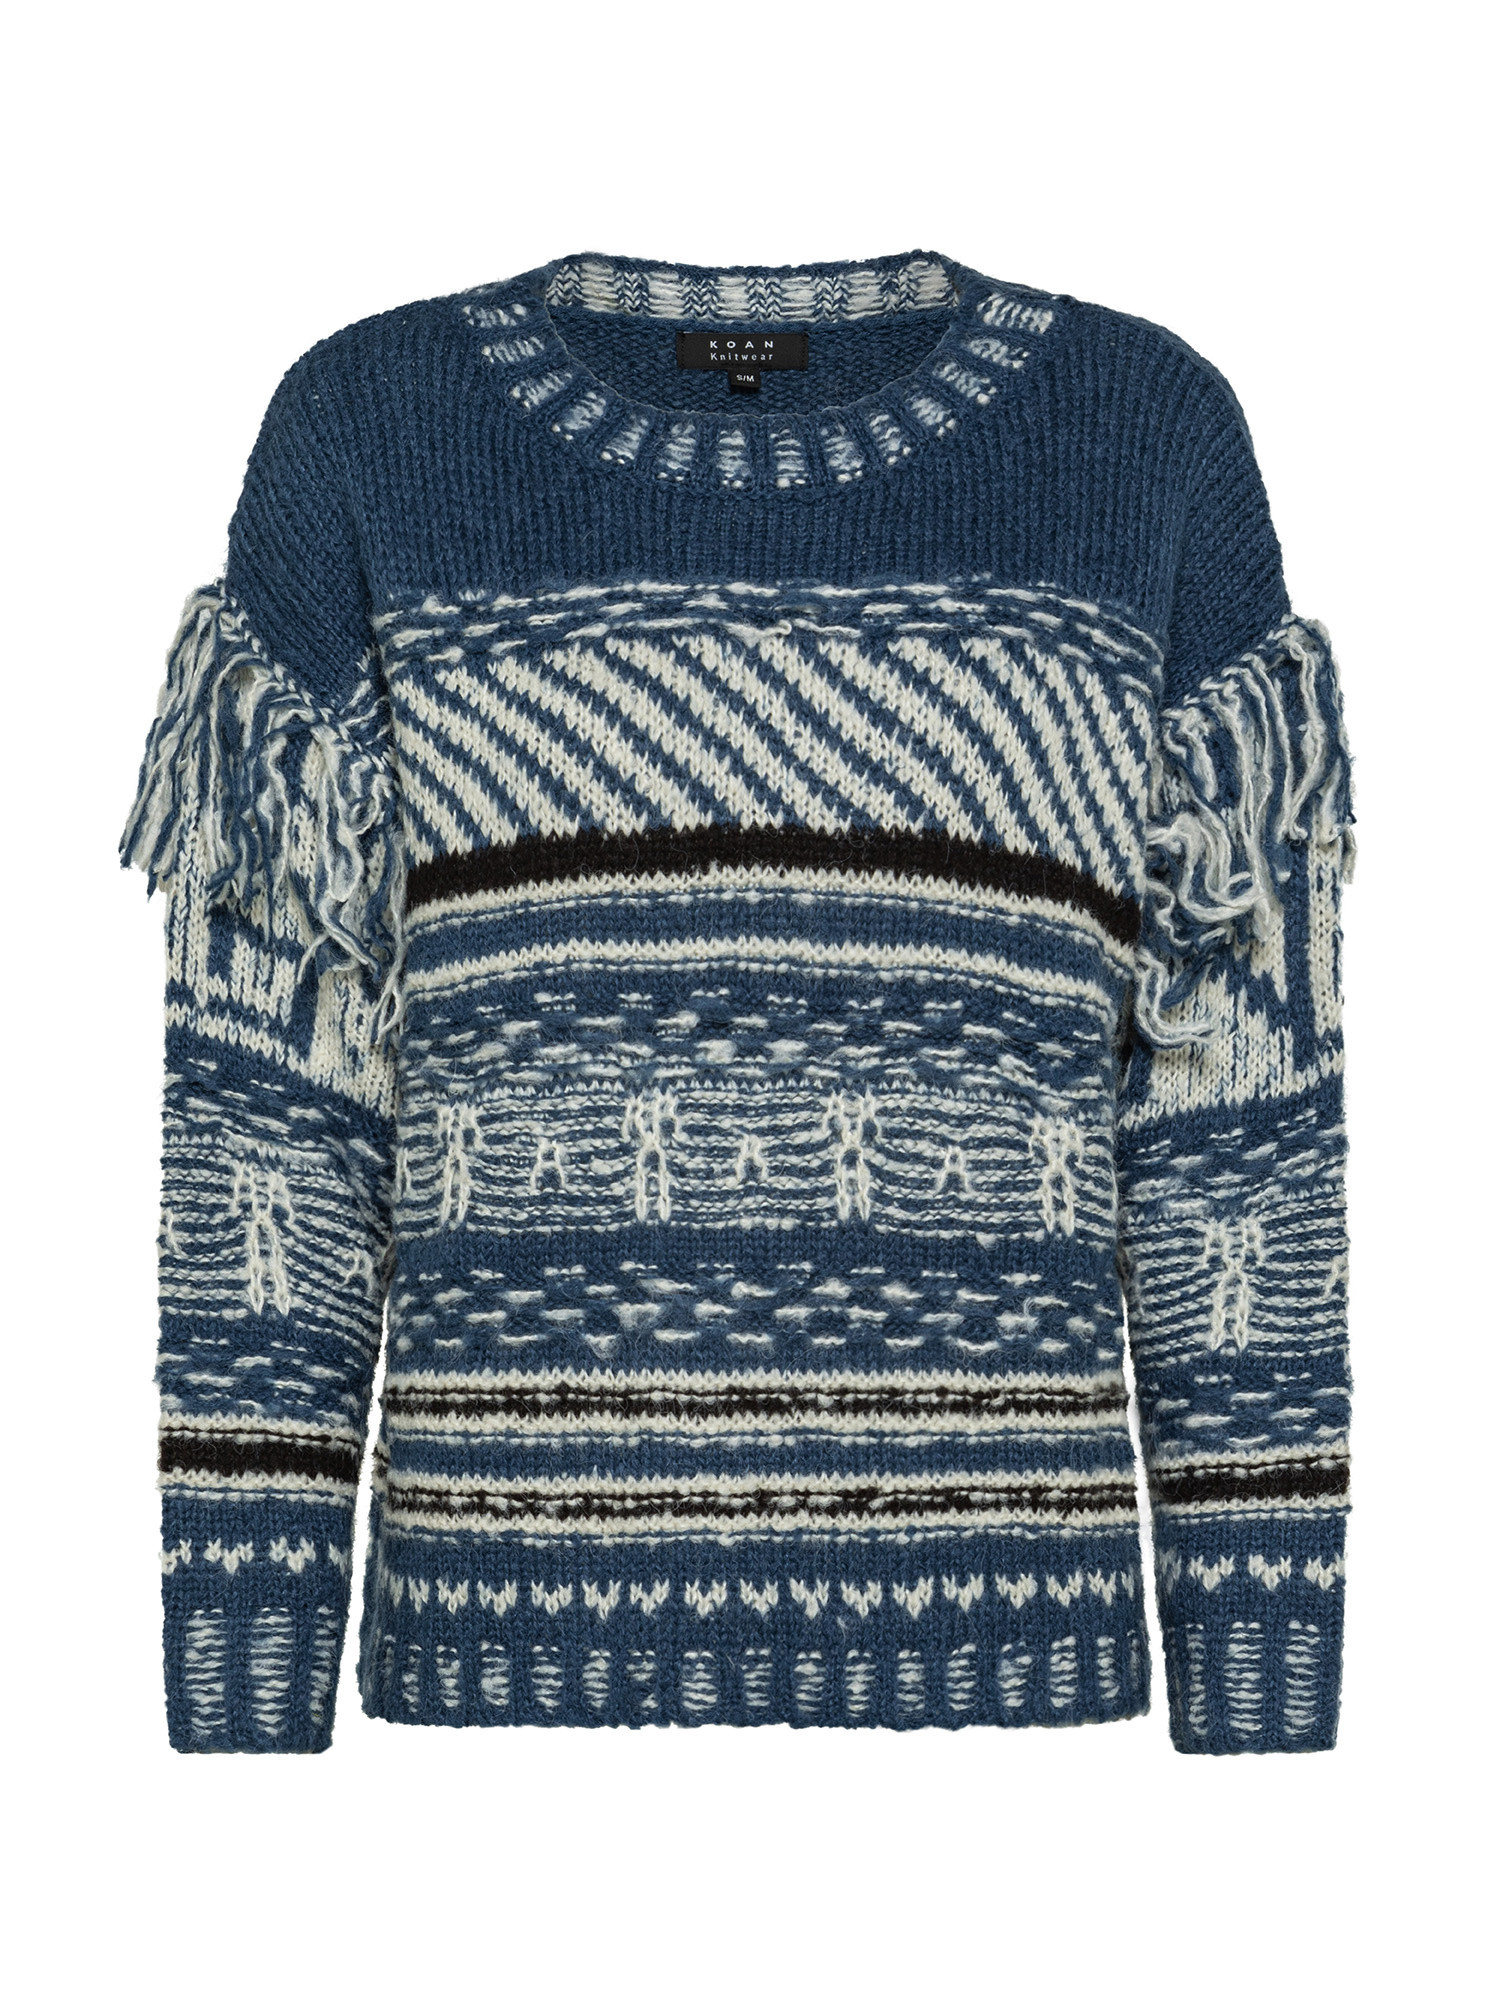 Koan - Ethnic crewneck pullover, Peacock, large image number 0